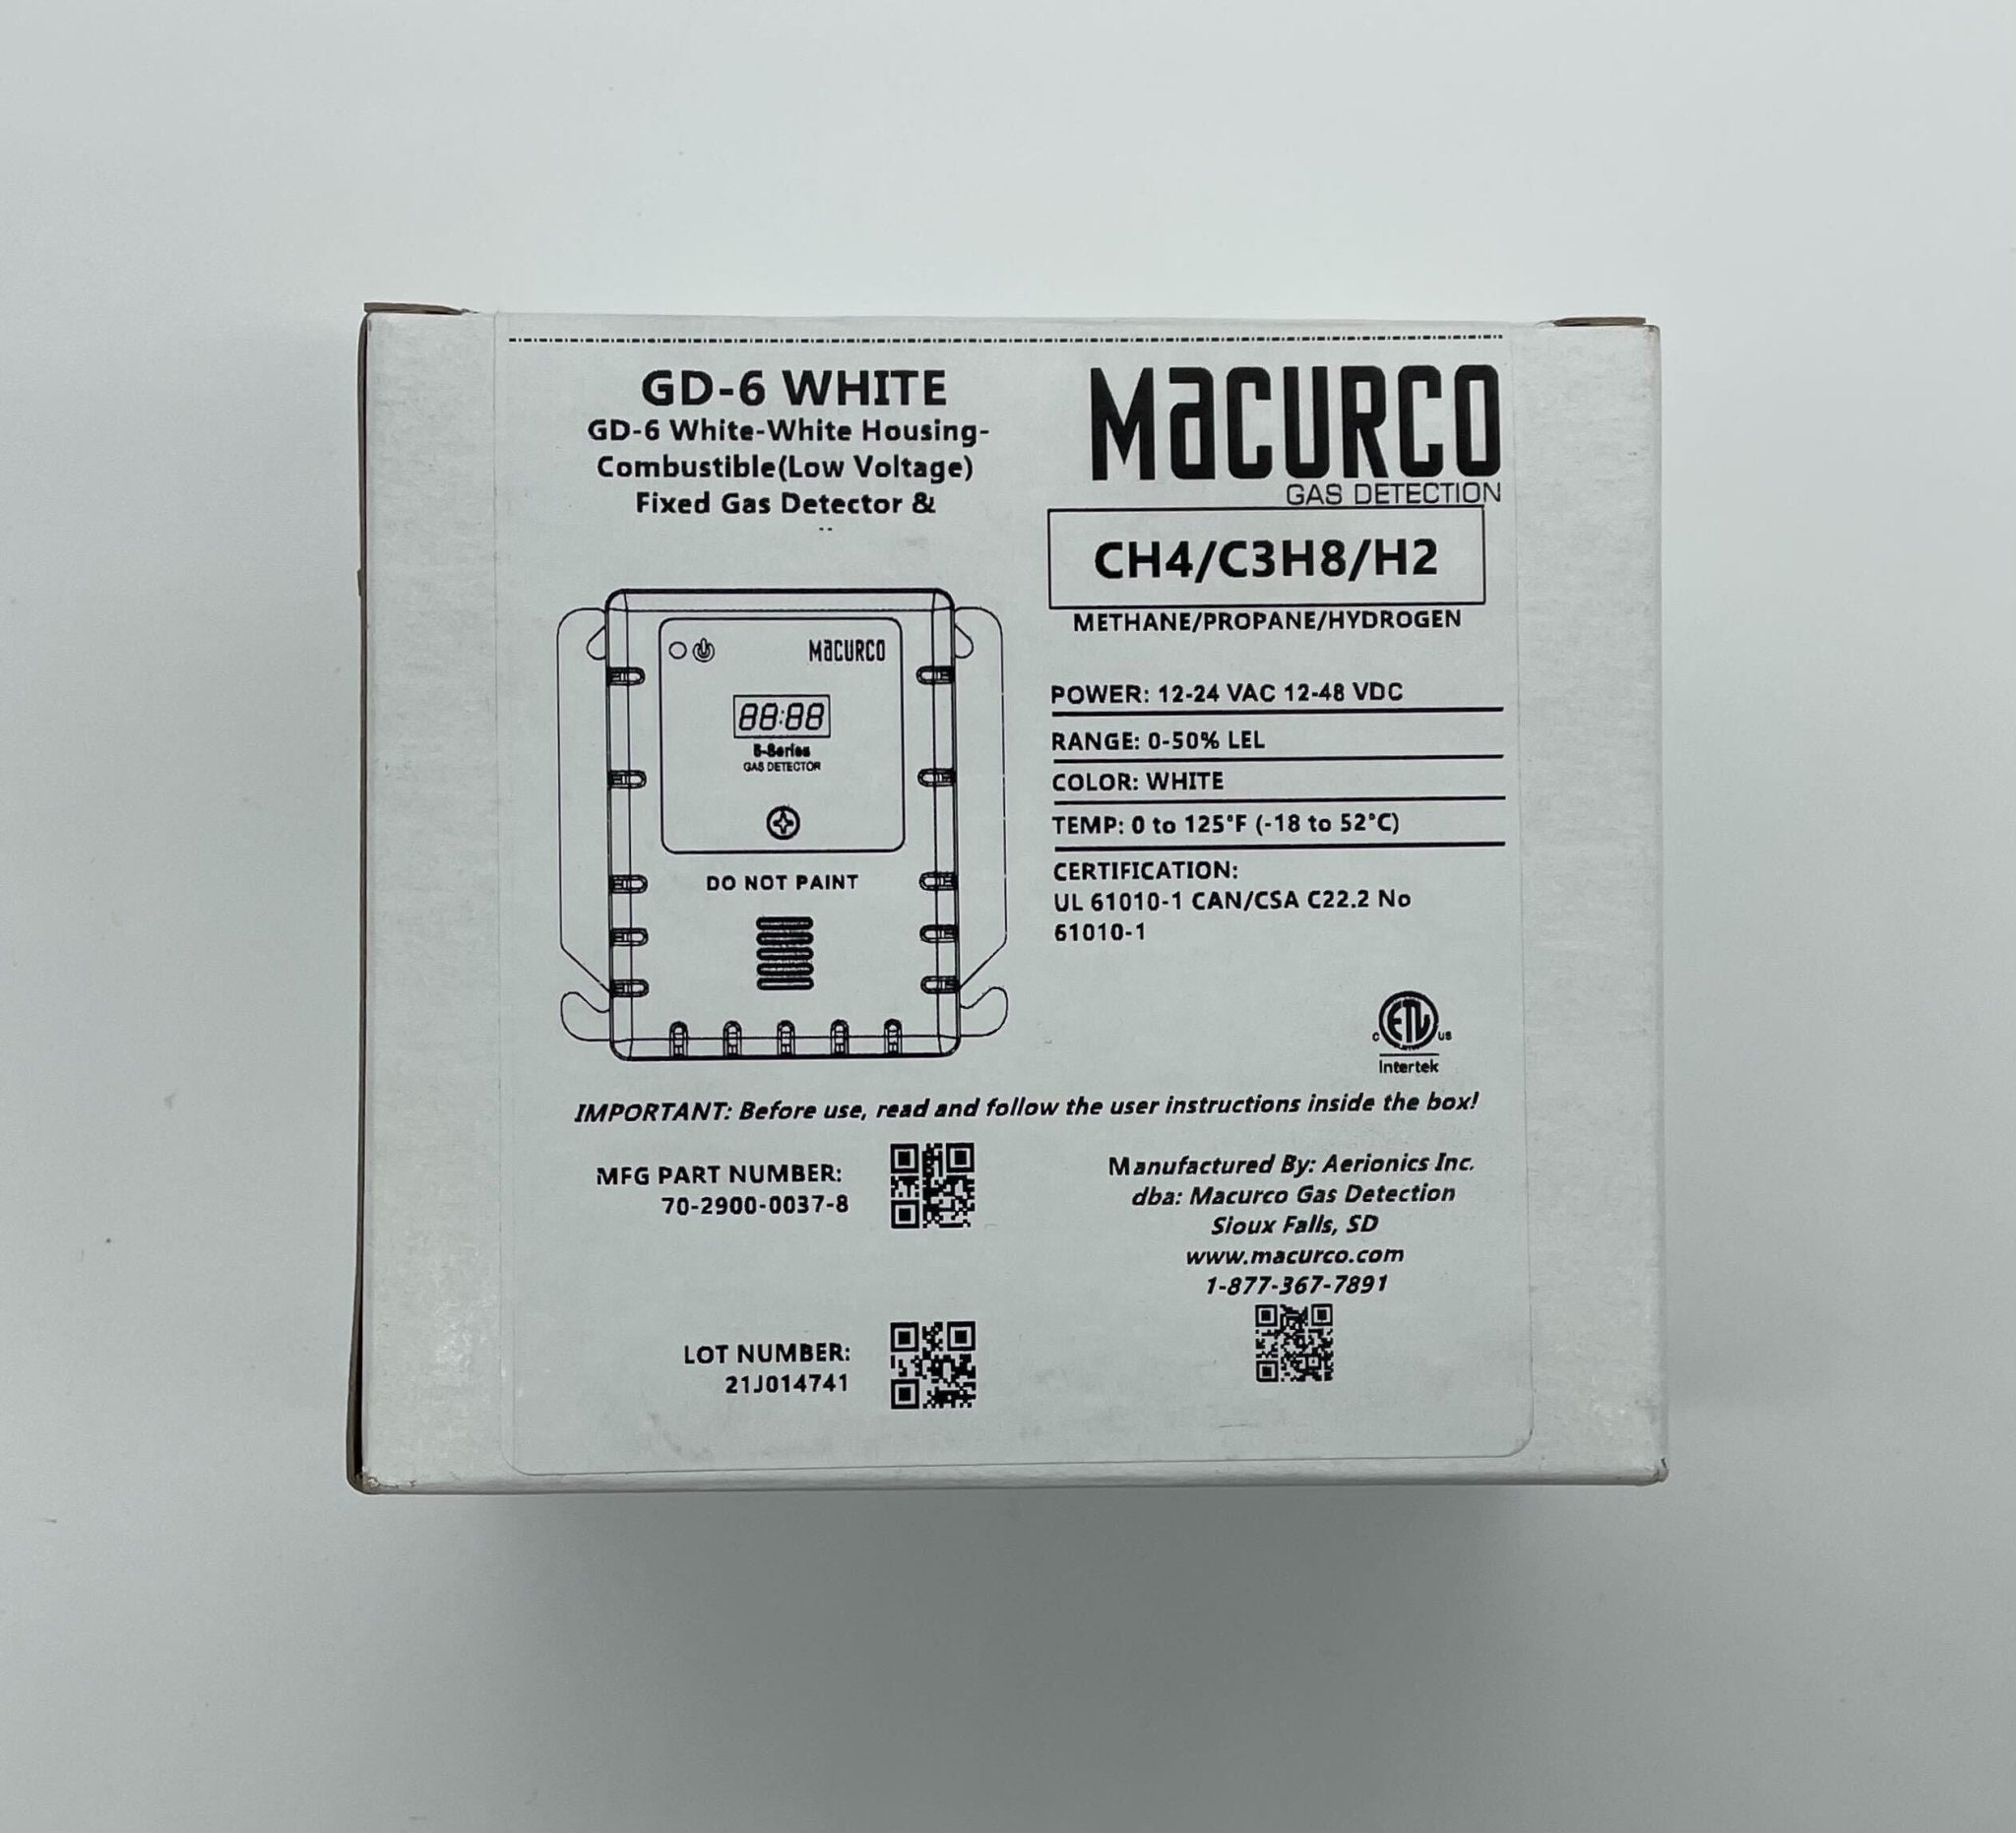 Macurco GD-6 WHITE Fixed Gas Detector - The Fire Alarm Supplier